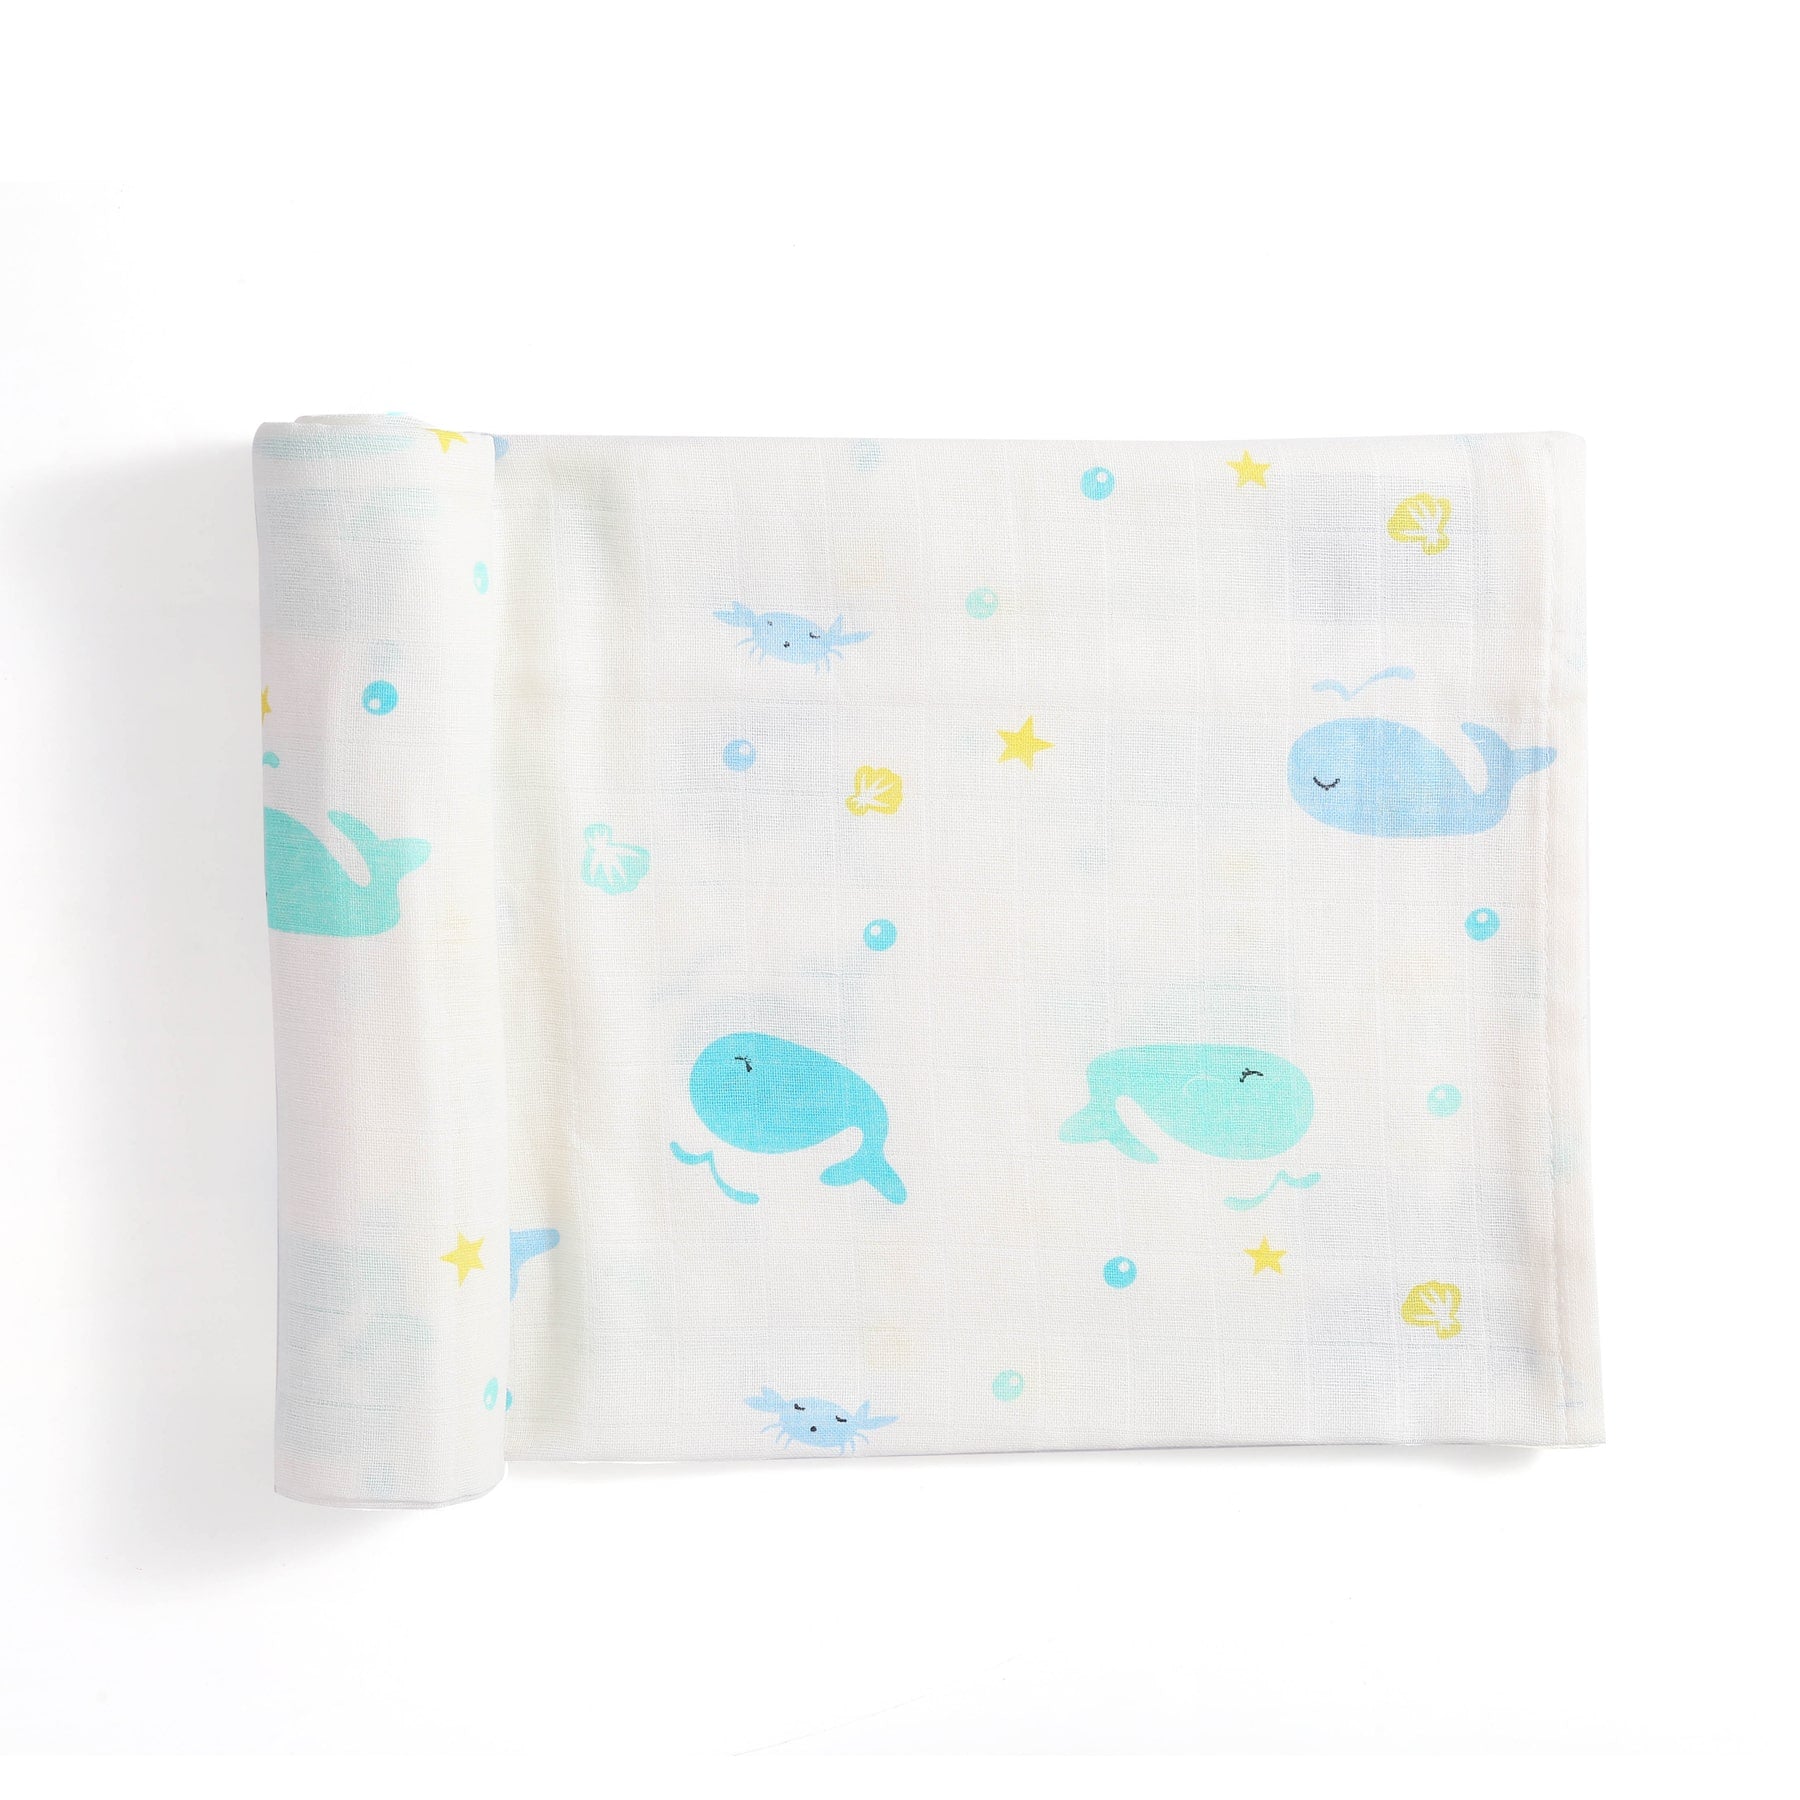 Antarctic Swaddle - Baby Swaddles at Louie Meets Lola